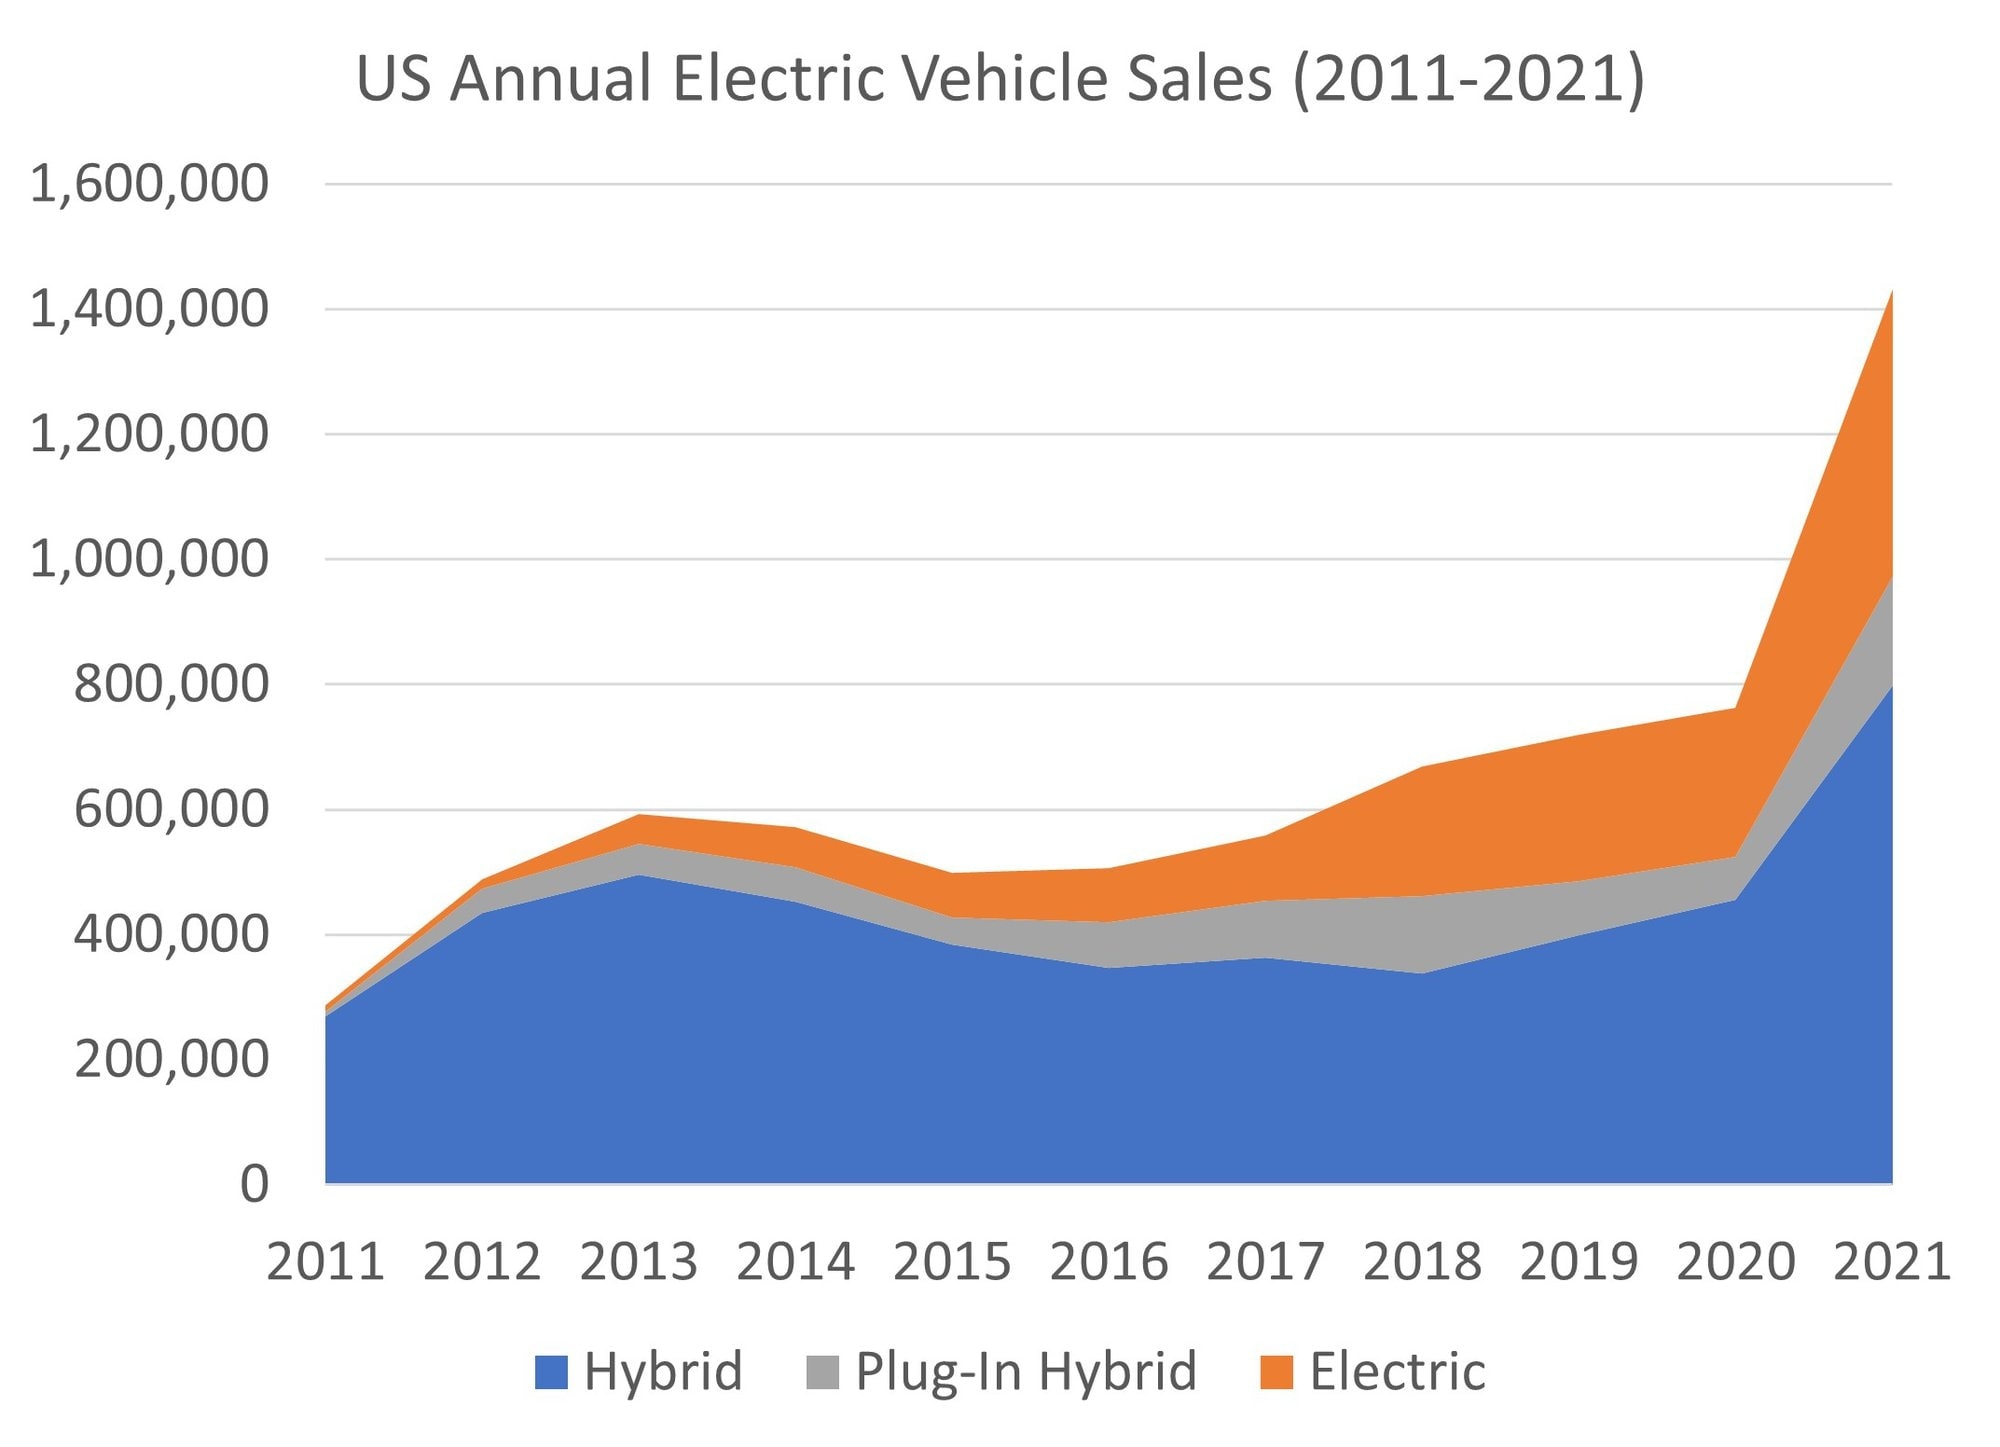 Figure 2. Sales and leases of new electric vehicles in the United States, 2011-2021. Source: US Bureau of Transportation Statistics 